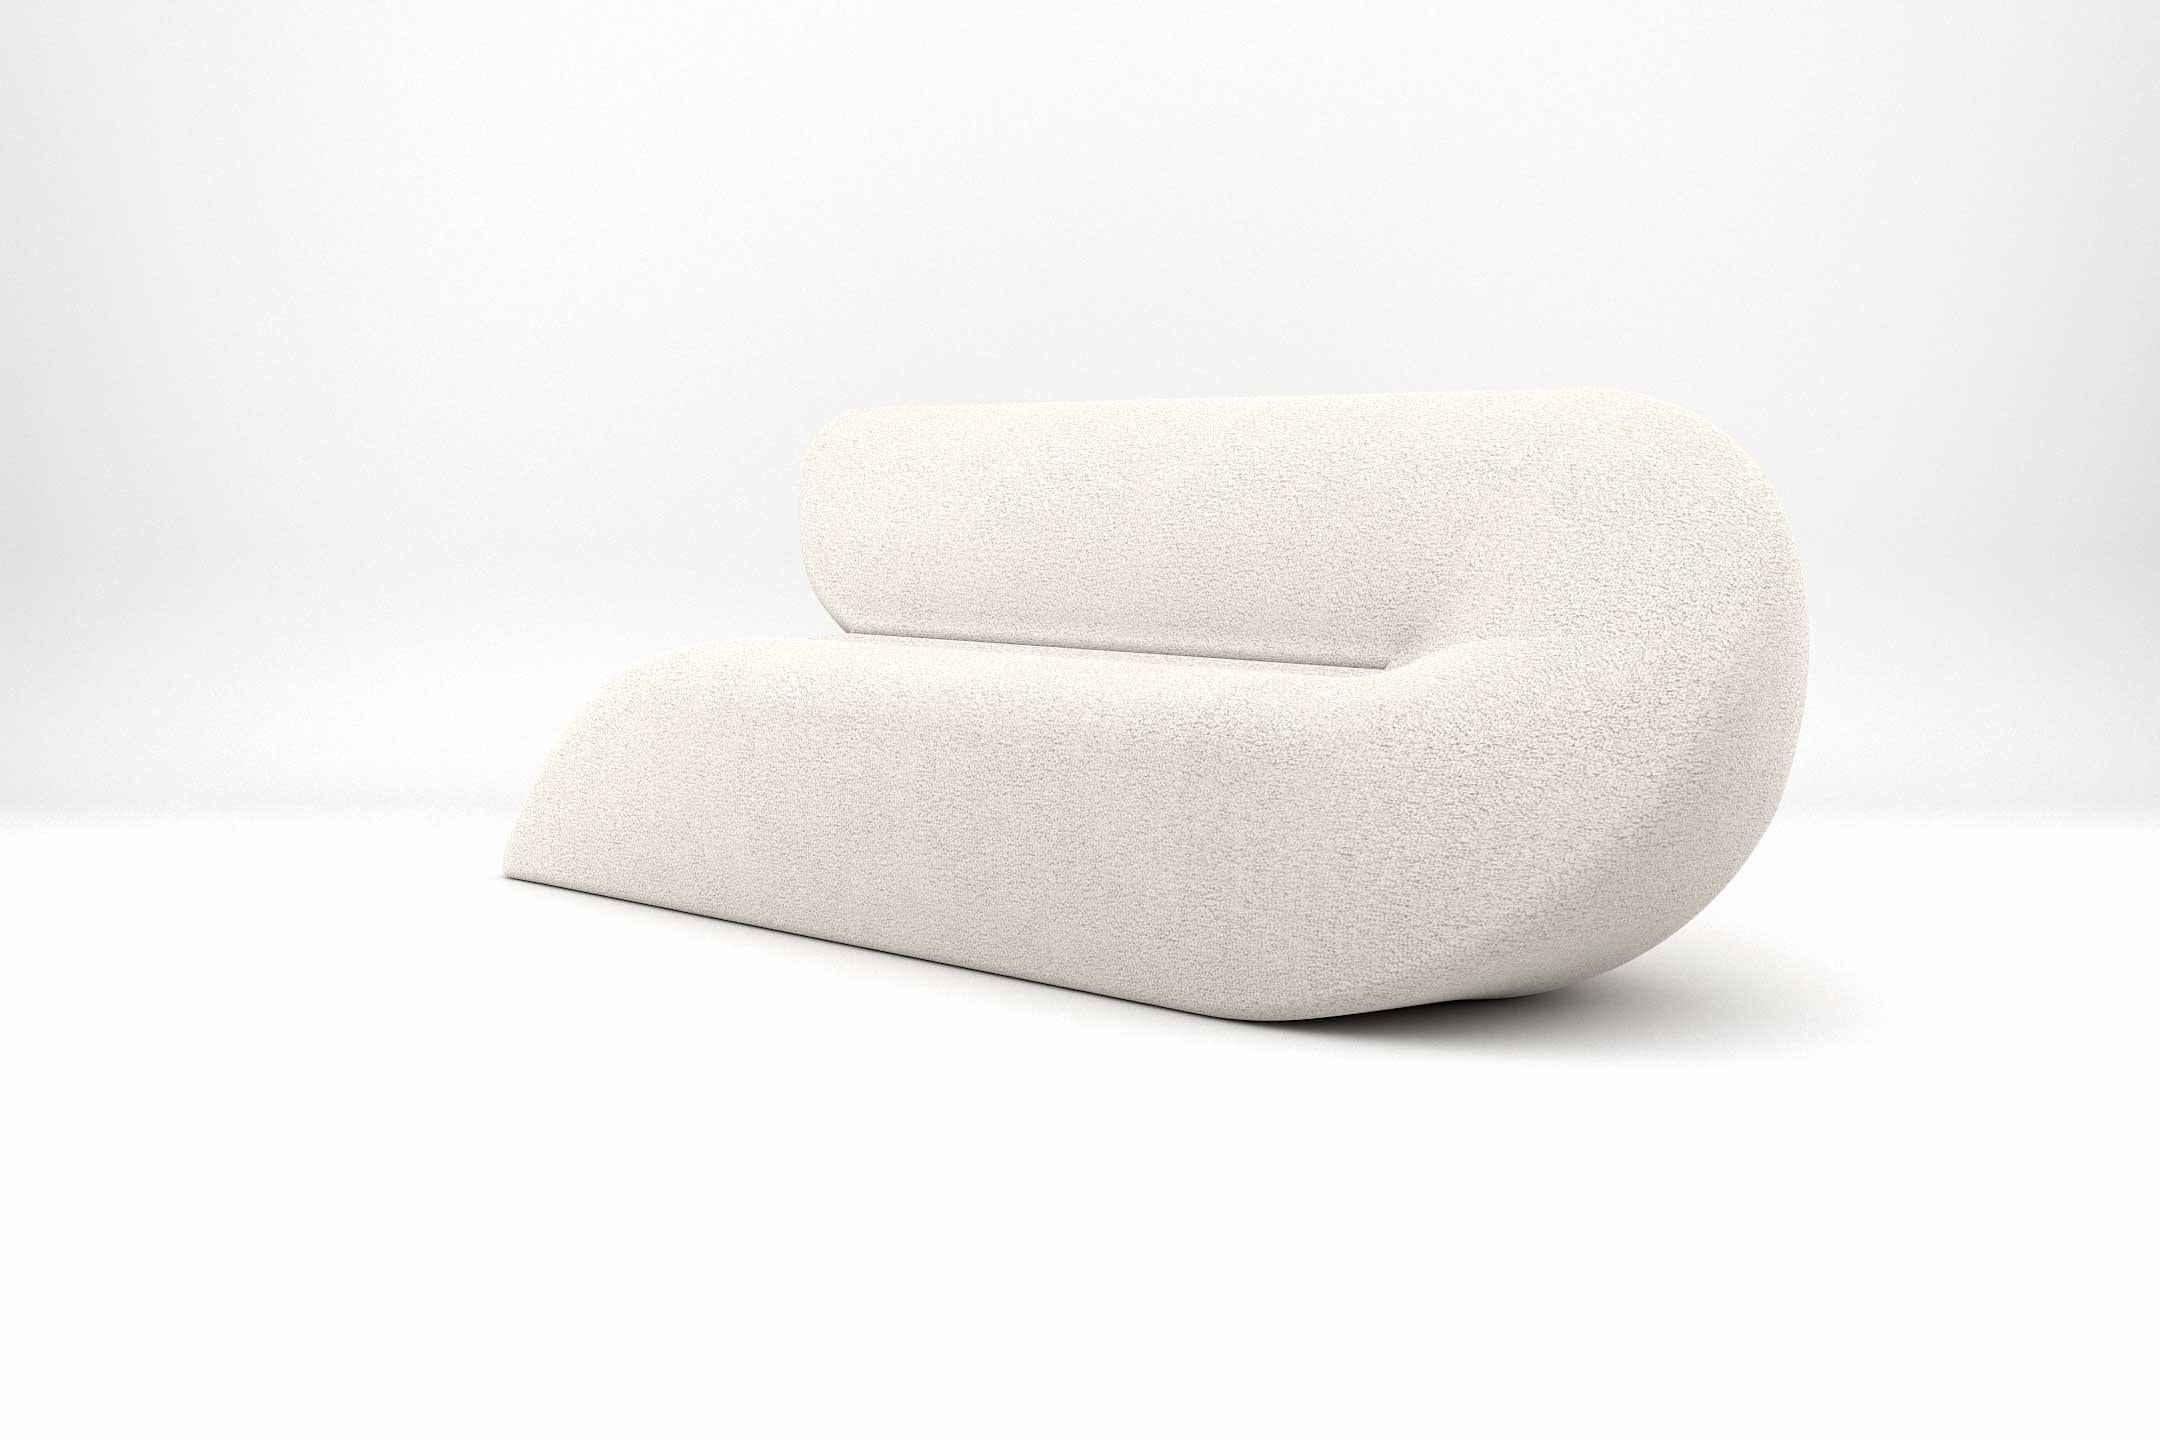 The curvaceous sides of the Delta collection, give the design a modern and elegant look; blending together a sense of warmth and comfortableness with a touch of minimalist simplicity. The piece was designed and manufactured by Prieto Studio, a